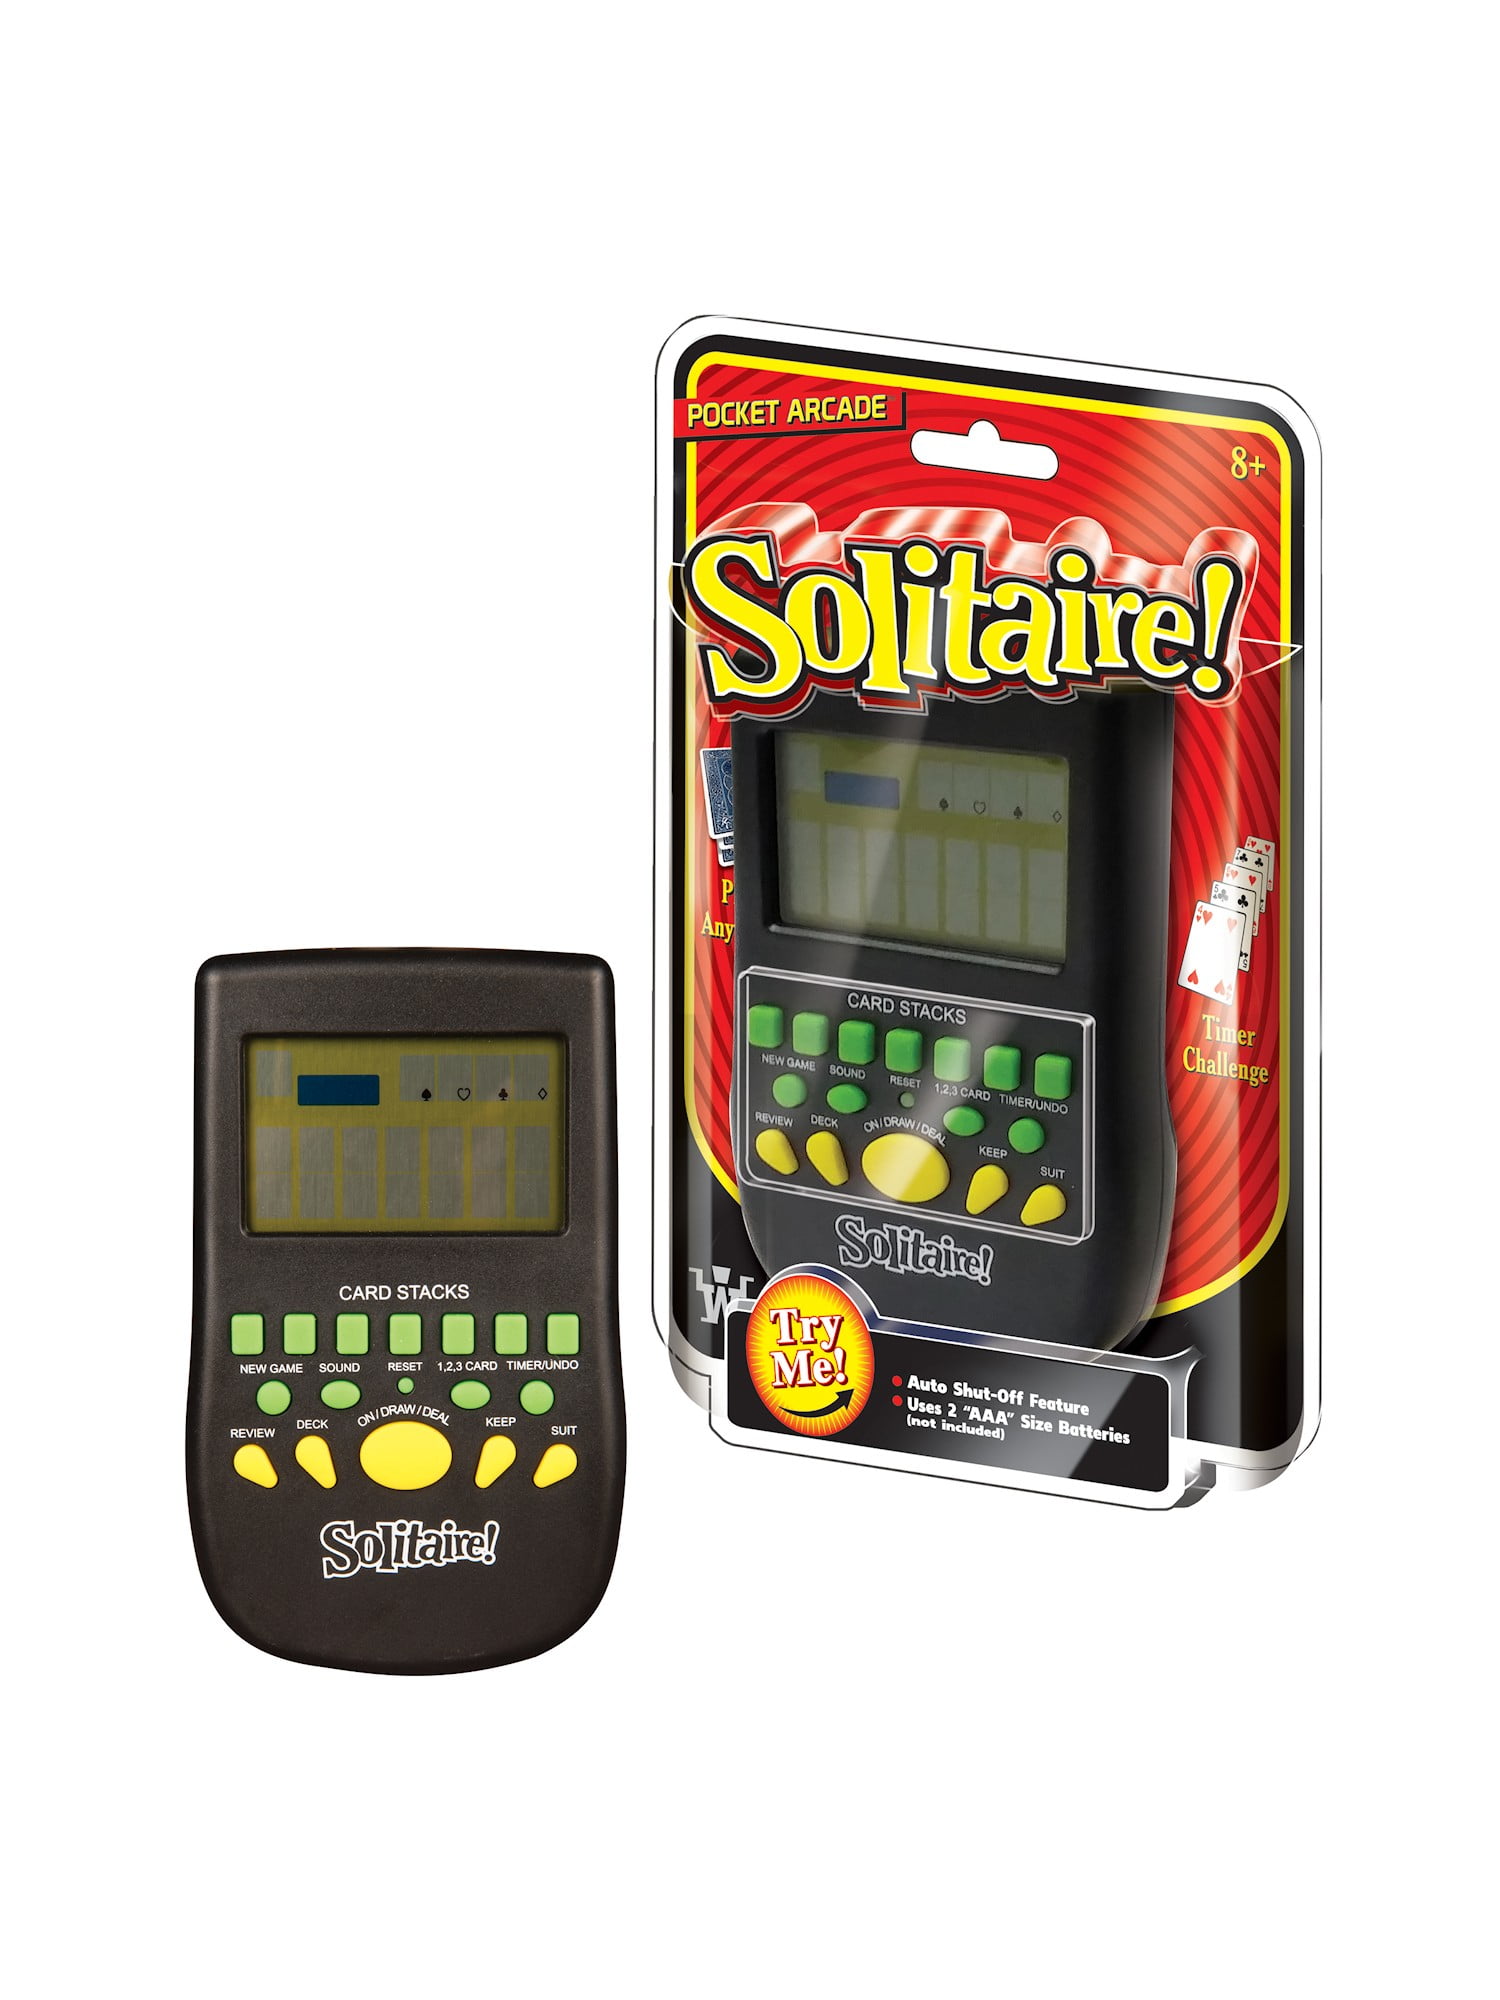 Westminster Pocket Arcade Solitaire Handheld Electronic Game New Sealed 